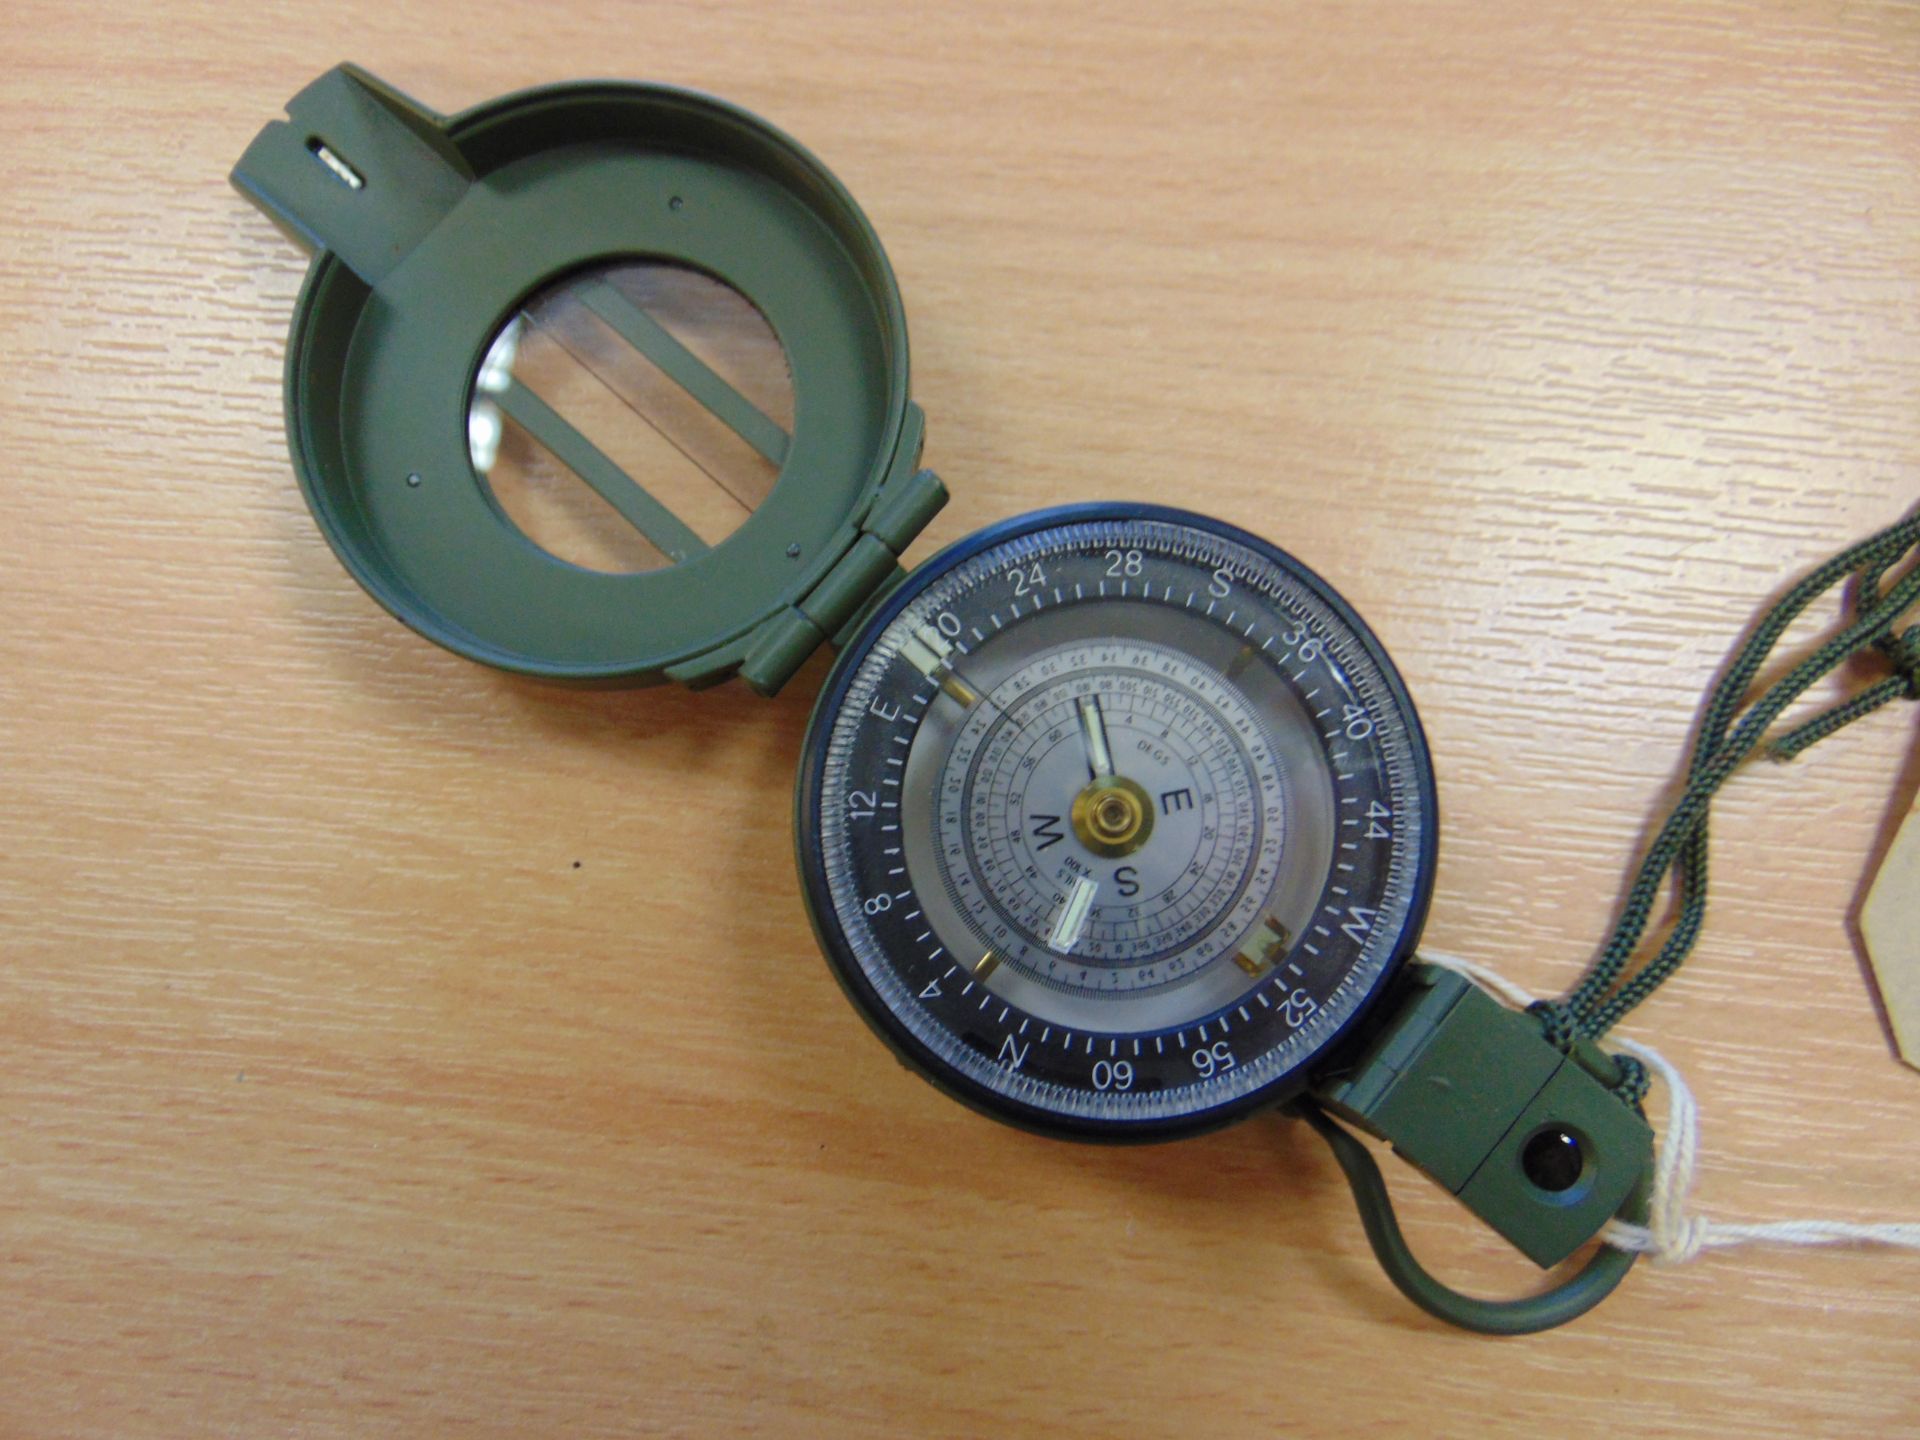 Genuine Unissued British Army Francis Barker M88 Marching Compass - Image 5 of 7